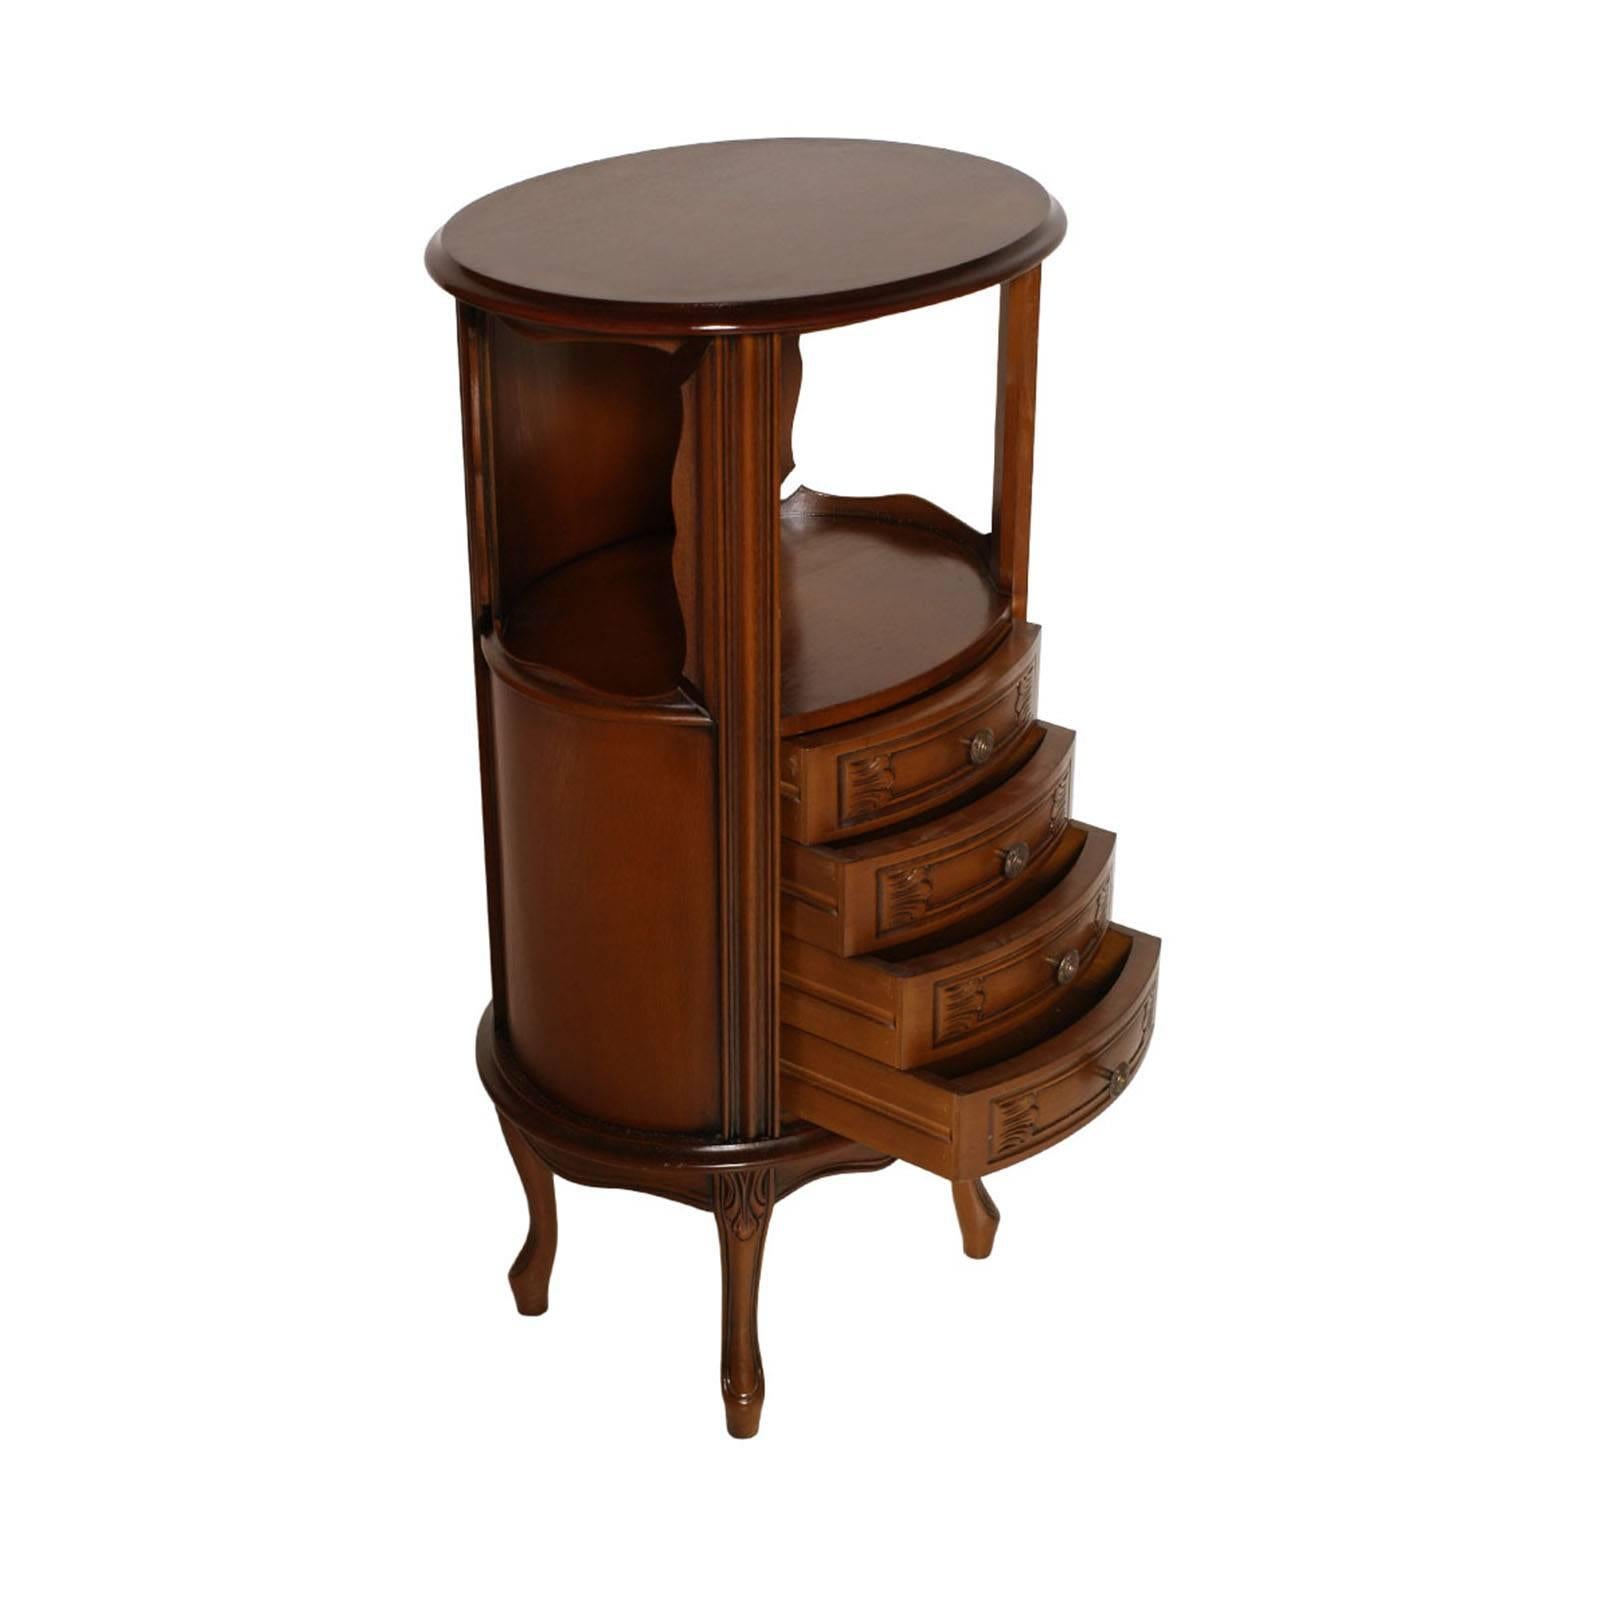 Period 1920s Art Nouveau style Italian oval Lombard cabinet with 4 drowers or nightstand in walnut, Bassano' Ebanistery. Restored and  Polished to wax

Measure cm: H 90 x W 50 x D 40.